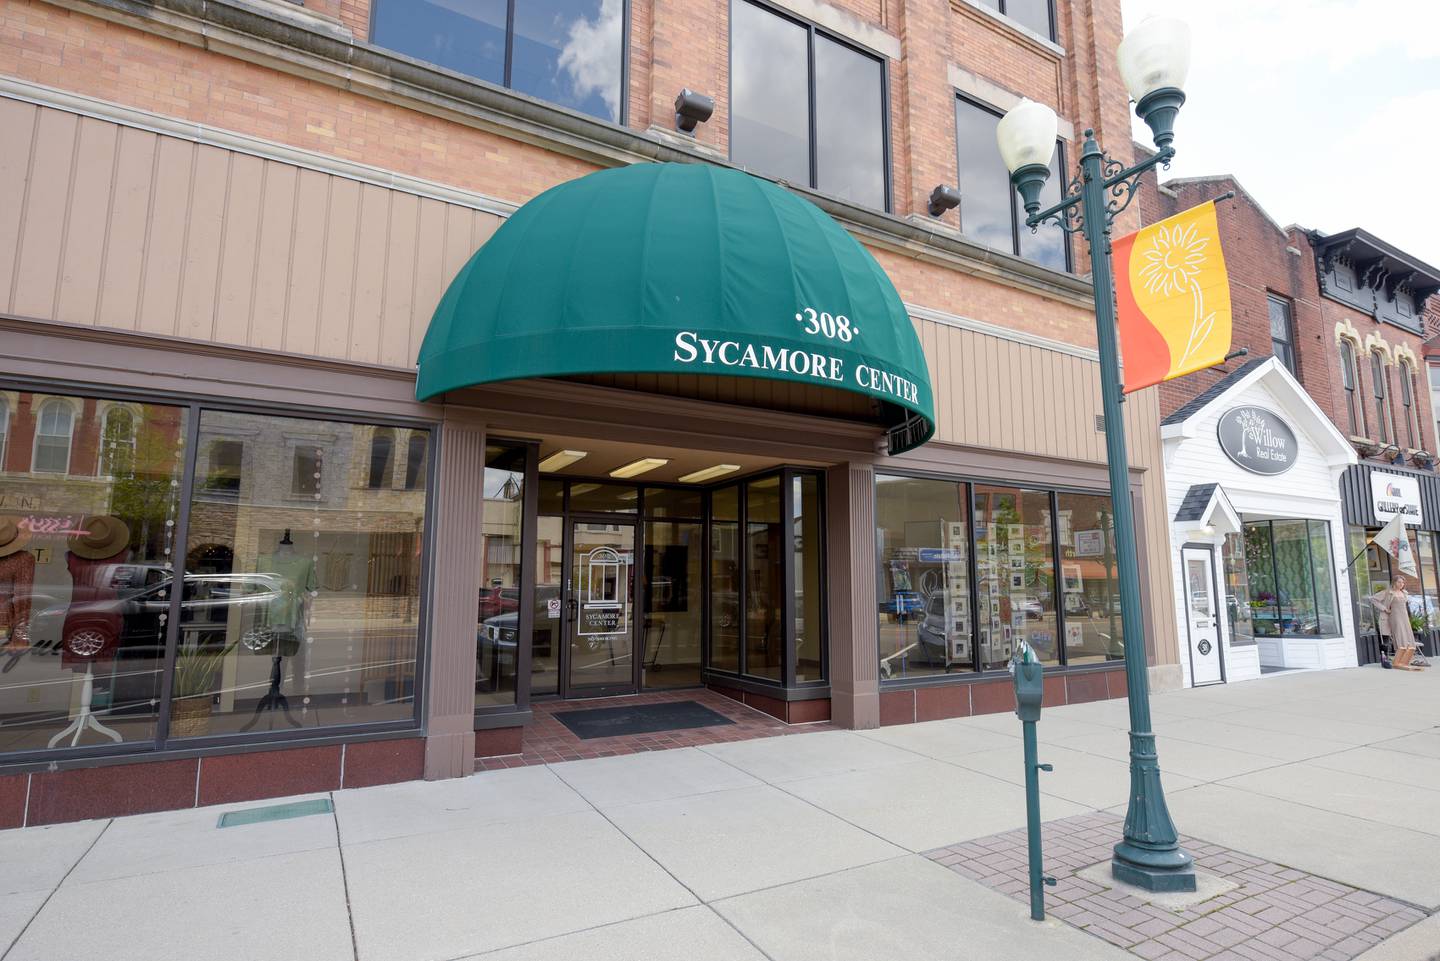 Sycamore City Hall in Sycamore, IL on Thursday, May 13, 2021.